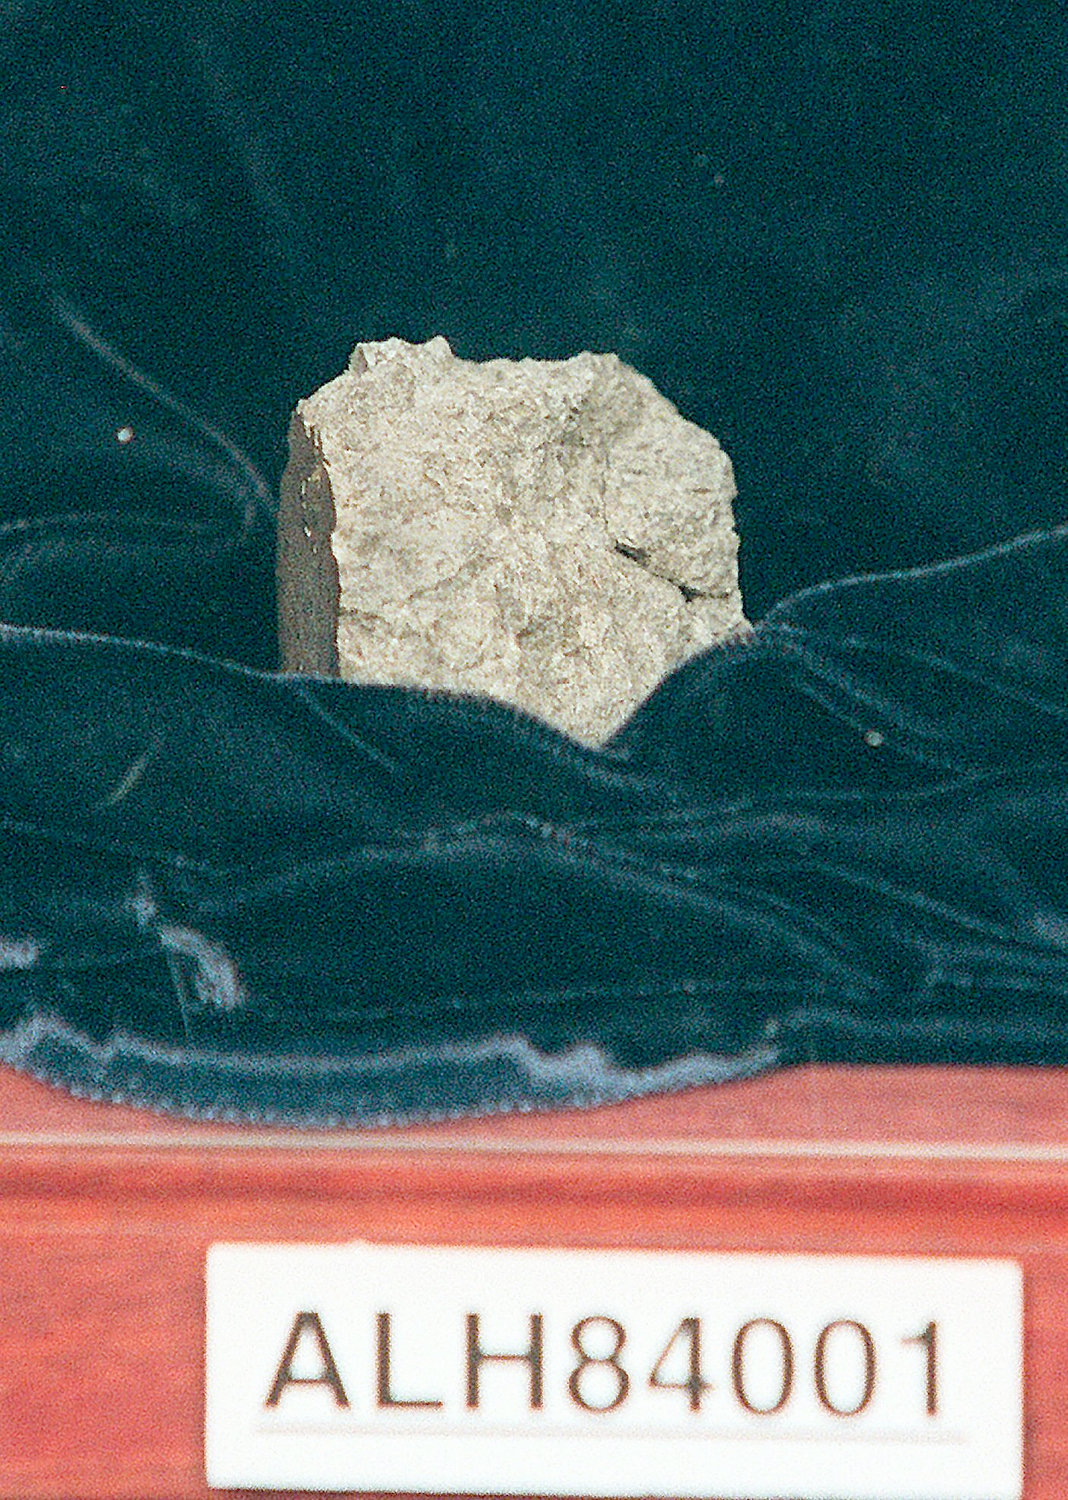 A CHUNK OF MARS — Mars rock Allan Hills 84001, discovered in 1984, is shown at a NASA news conference in Washington.